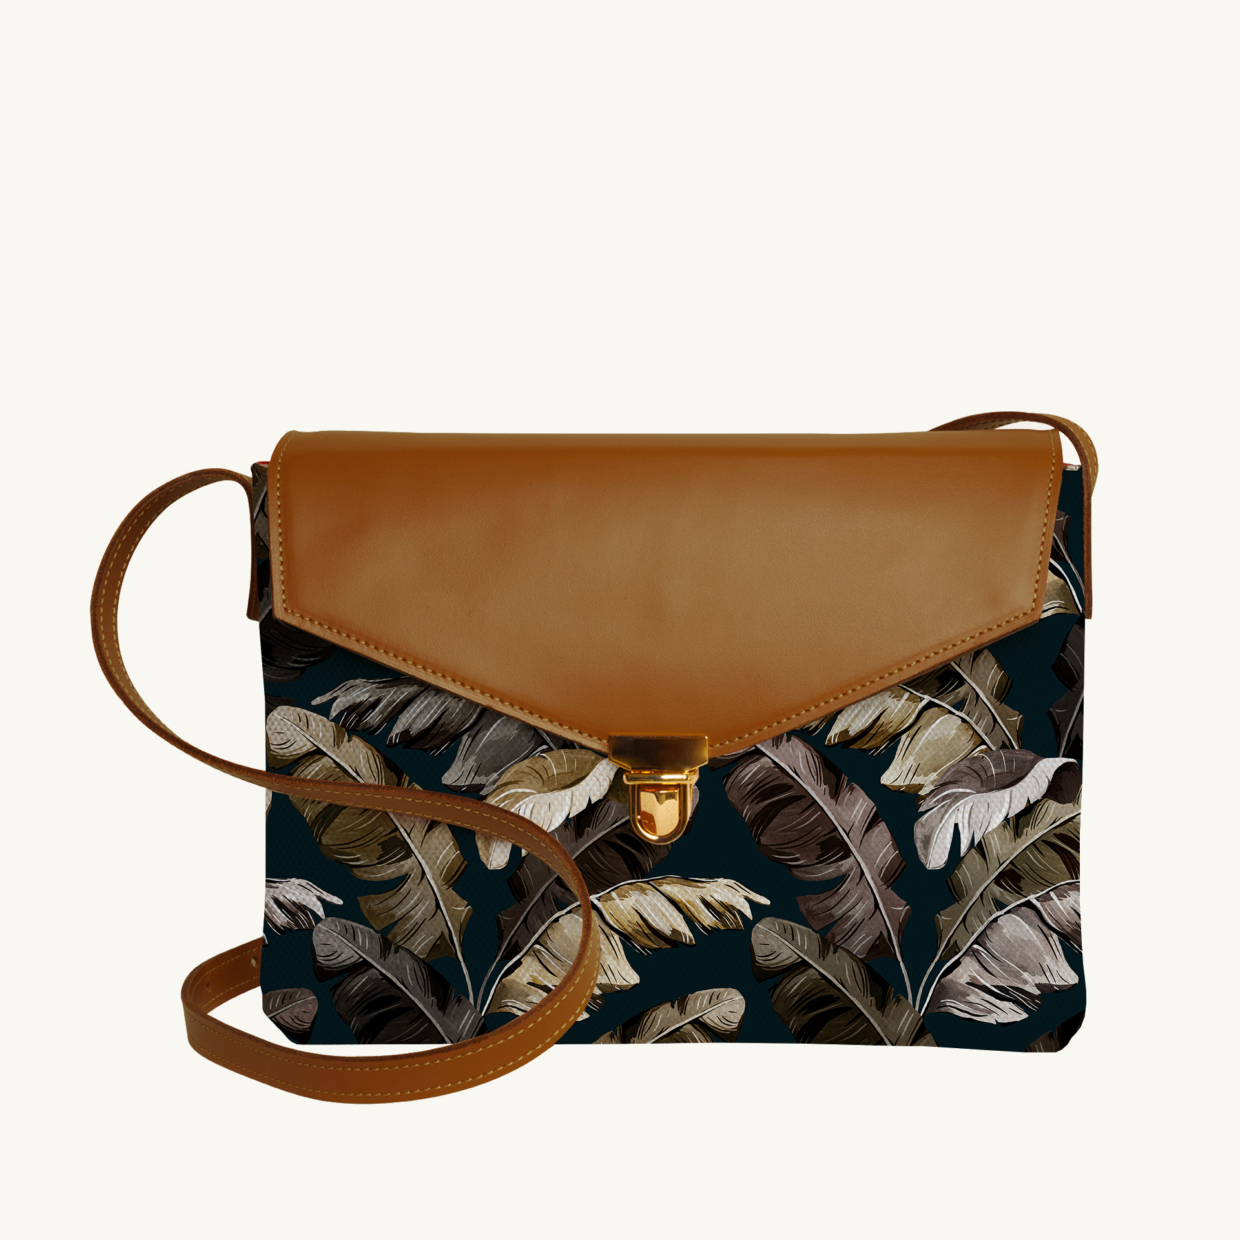 Purse Tropical N°13 - Camel leather